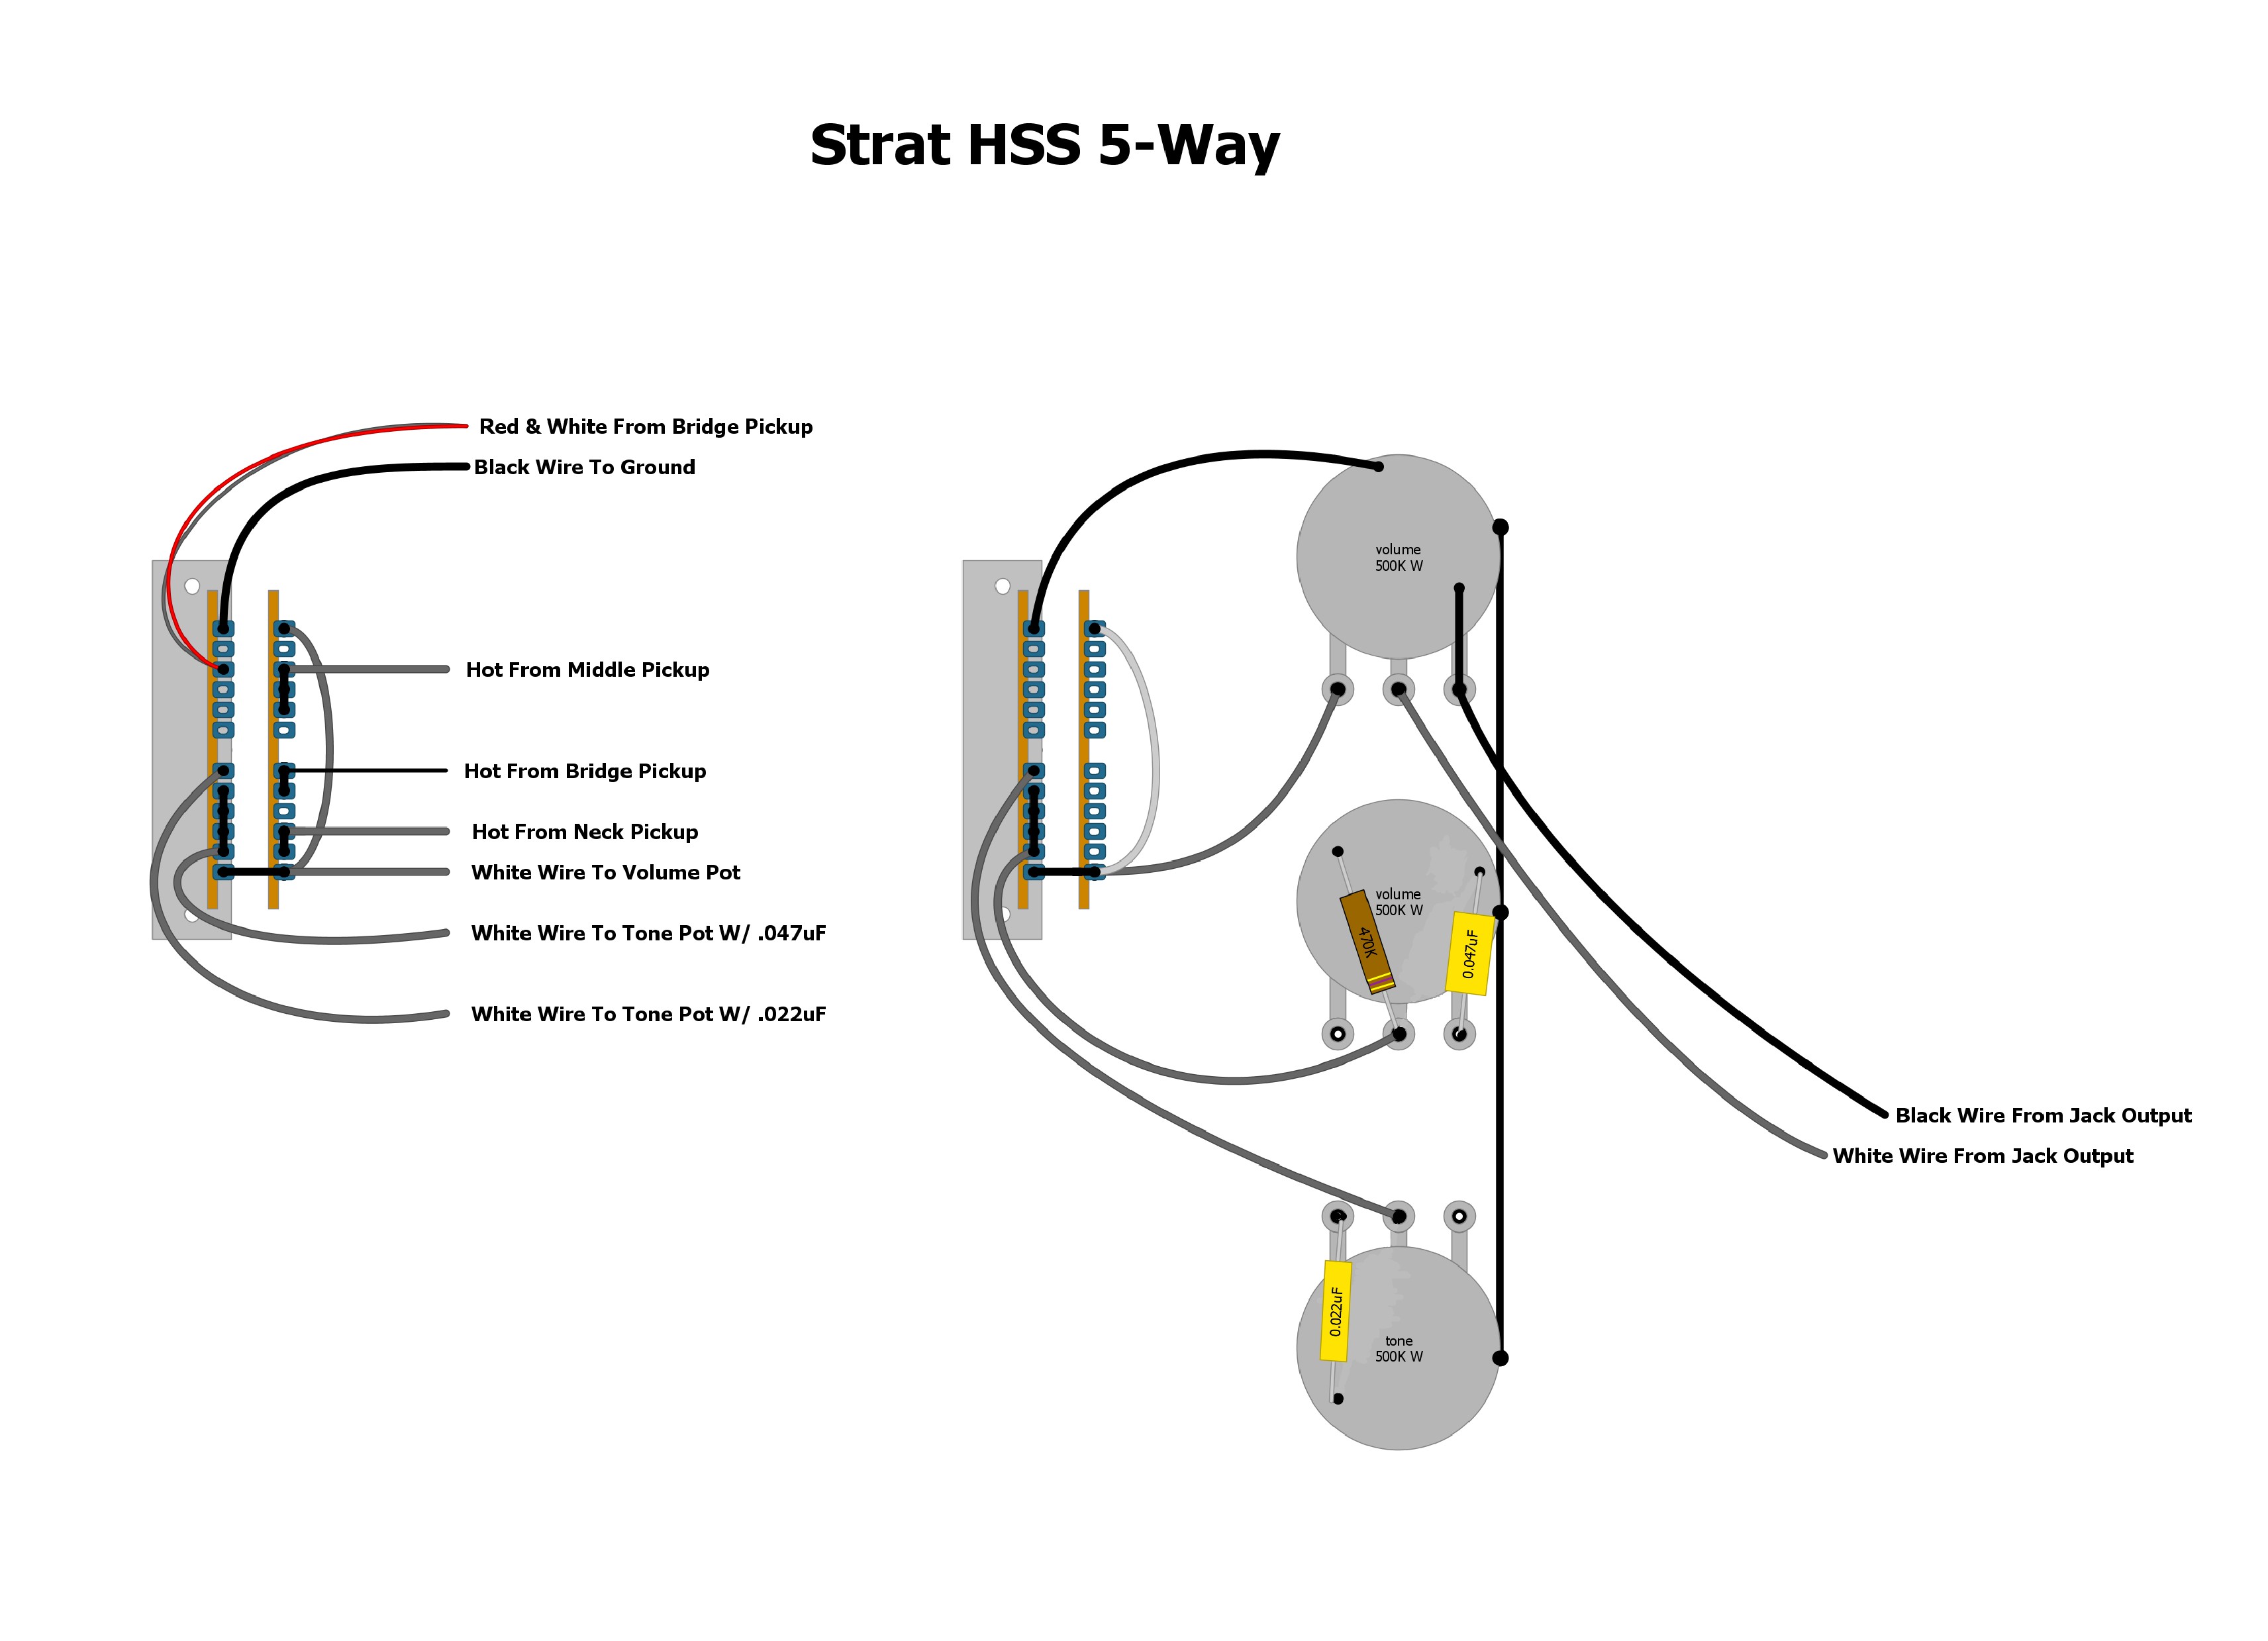 Wiring Diagram for Fender Stratocaster 5 Way Switch Save Wiring Diagram Fender Strat 5 Way Switch